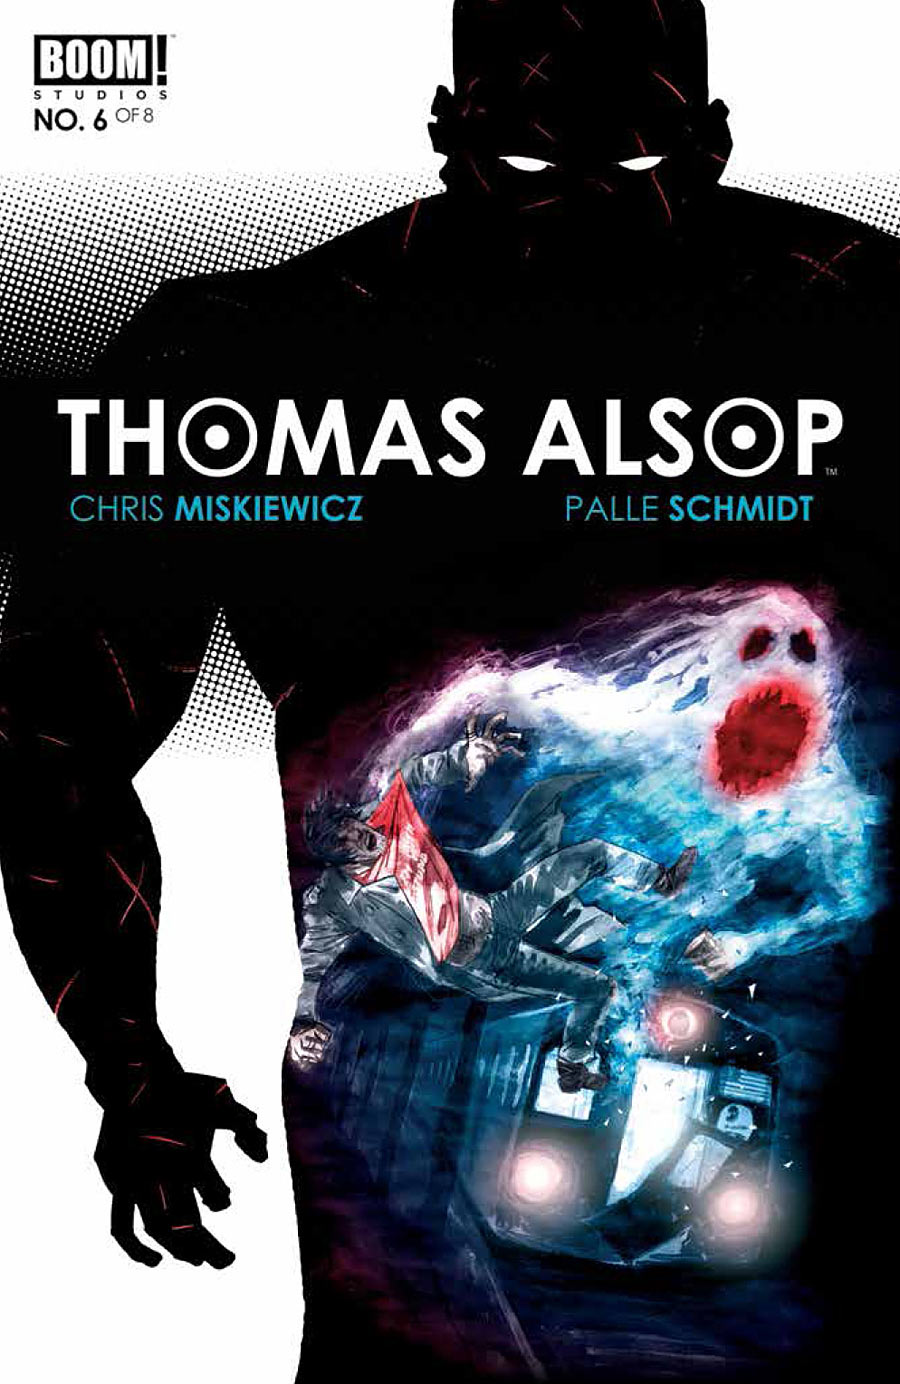 Thomas Alsop issue 6 of , OUT NOW from BOOM!